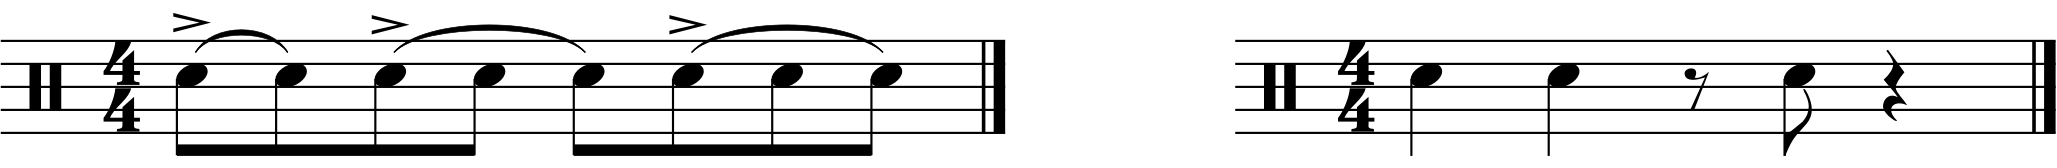 The basic syncopated rhythm for these fills.